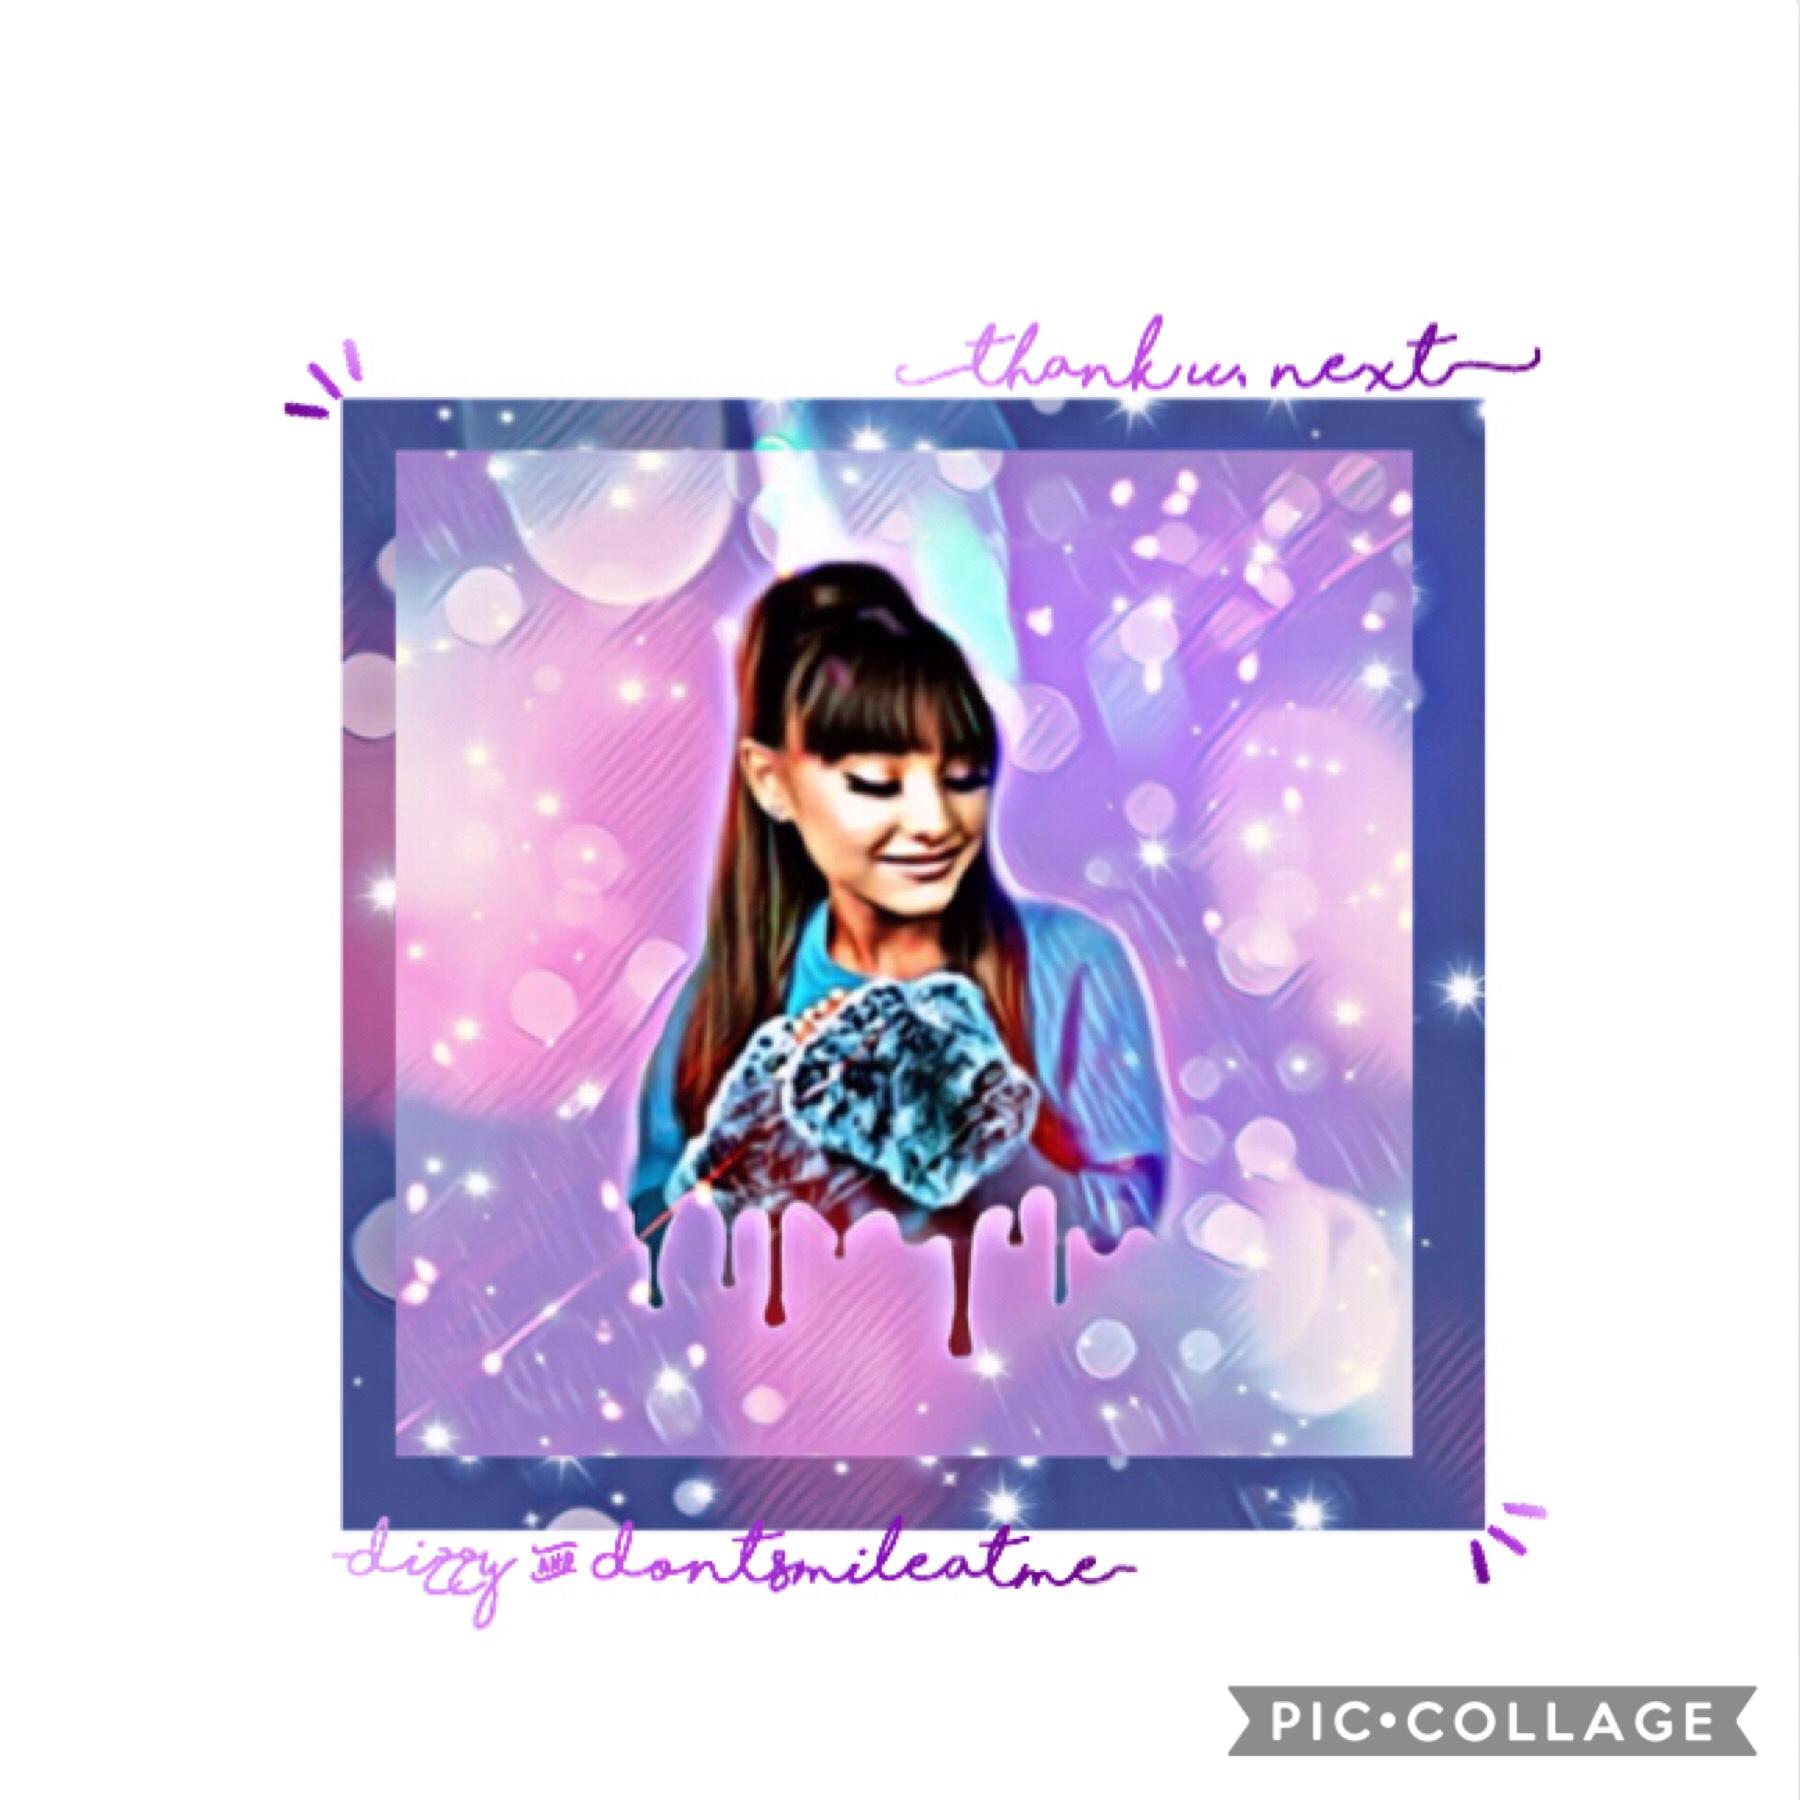 ☔️tappy☂️
collab with ☂️dontsmileatme-☔️ she did the amazing BG😍and I did the not so great text😂

daily shoutout: 💫MAGIXAL1FE💫
comment 😊 for a shoutout 

QOTD: Wuts ur fav TV show?
AOTD: Riverdale💕